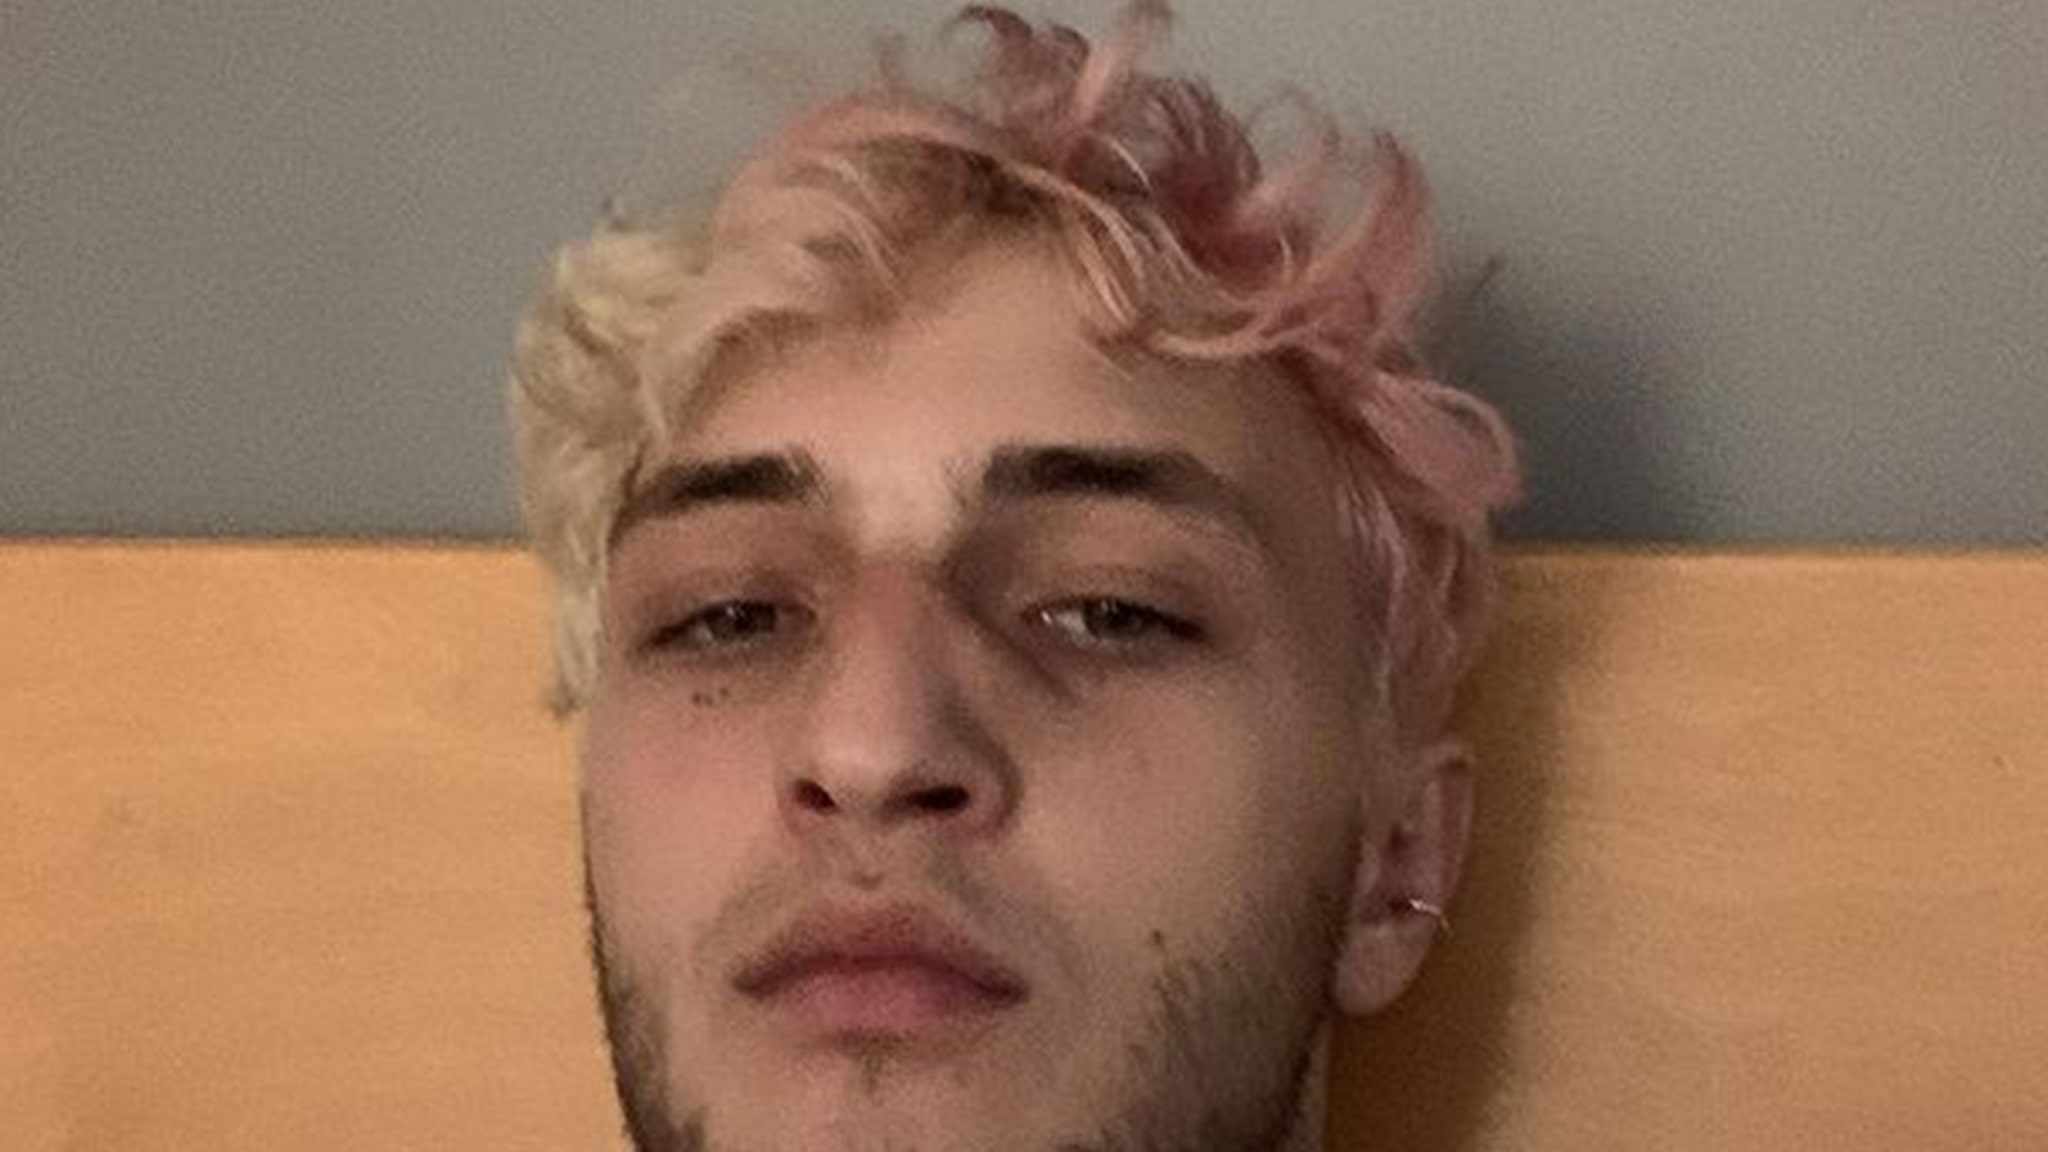 Anwar Hadid is an antivaxxer who does not get the COVID vaccine